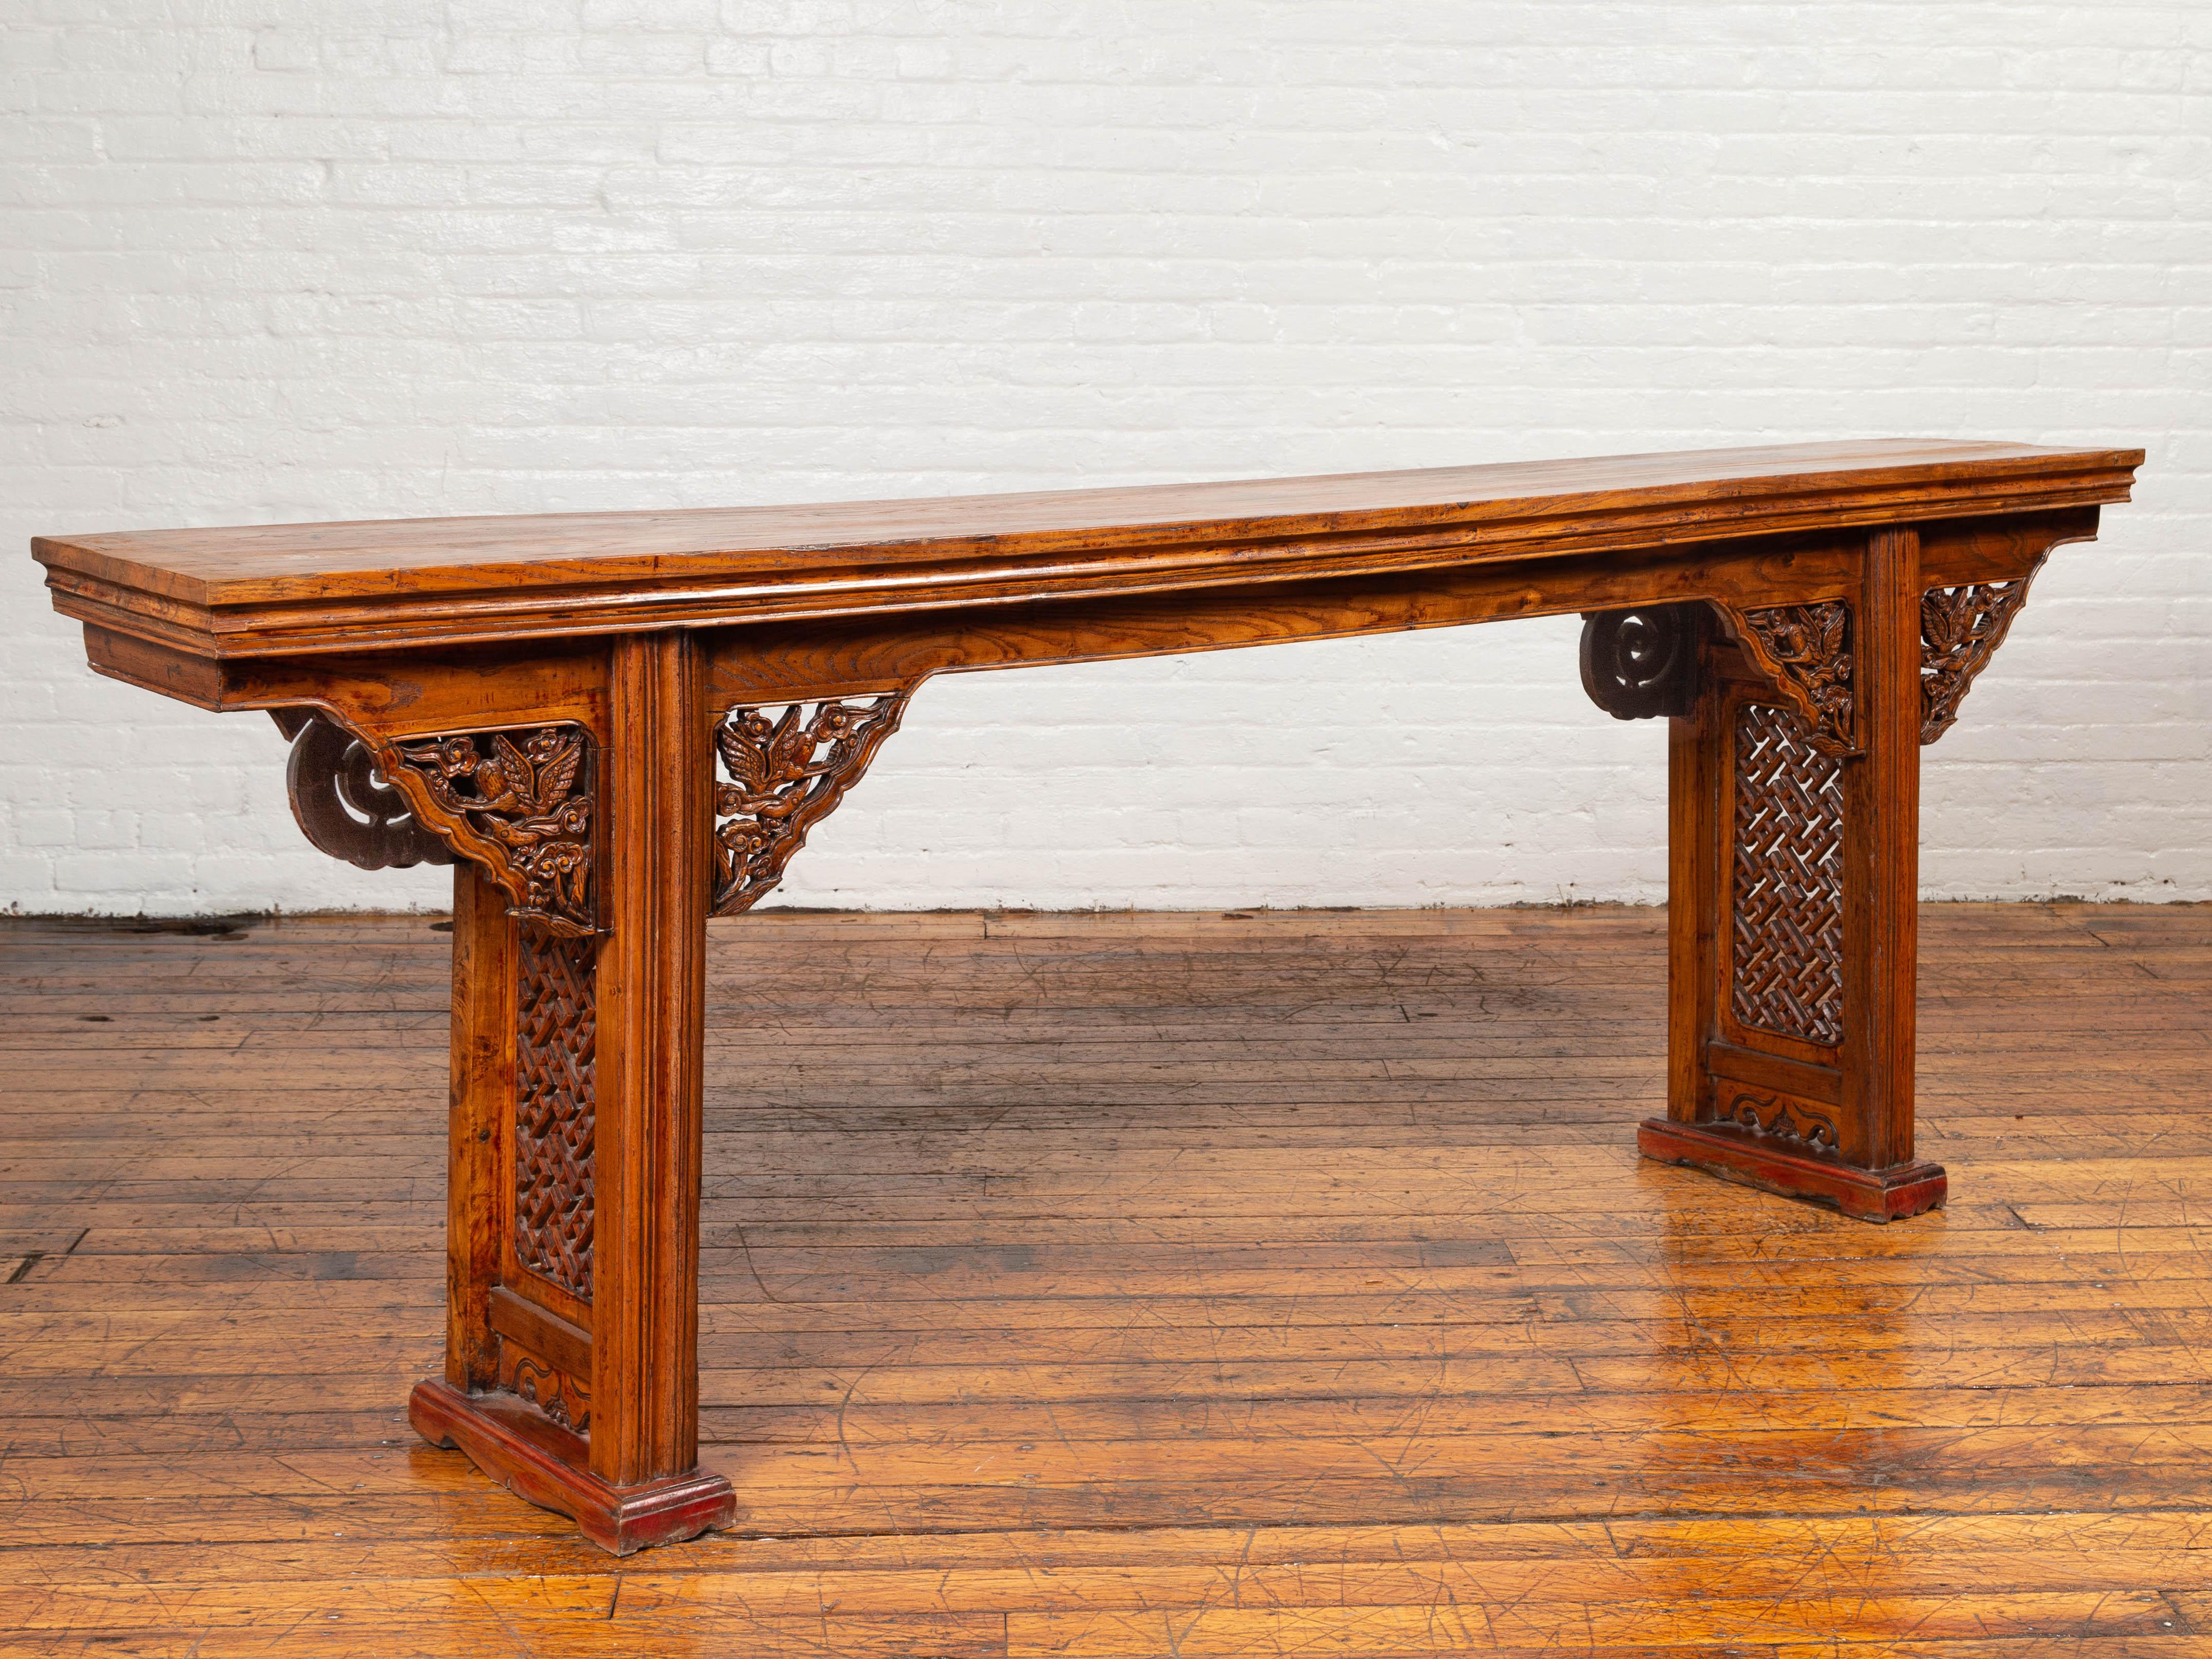 A Chinese Ming Dynasty style altar console table with carved spandrels and fretwork design. Attracting our attention with its elegant lines and skillfully carved décor, this Chinese Ming Dynasty style console altar table features a long and narrow